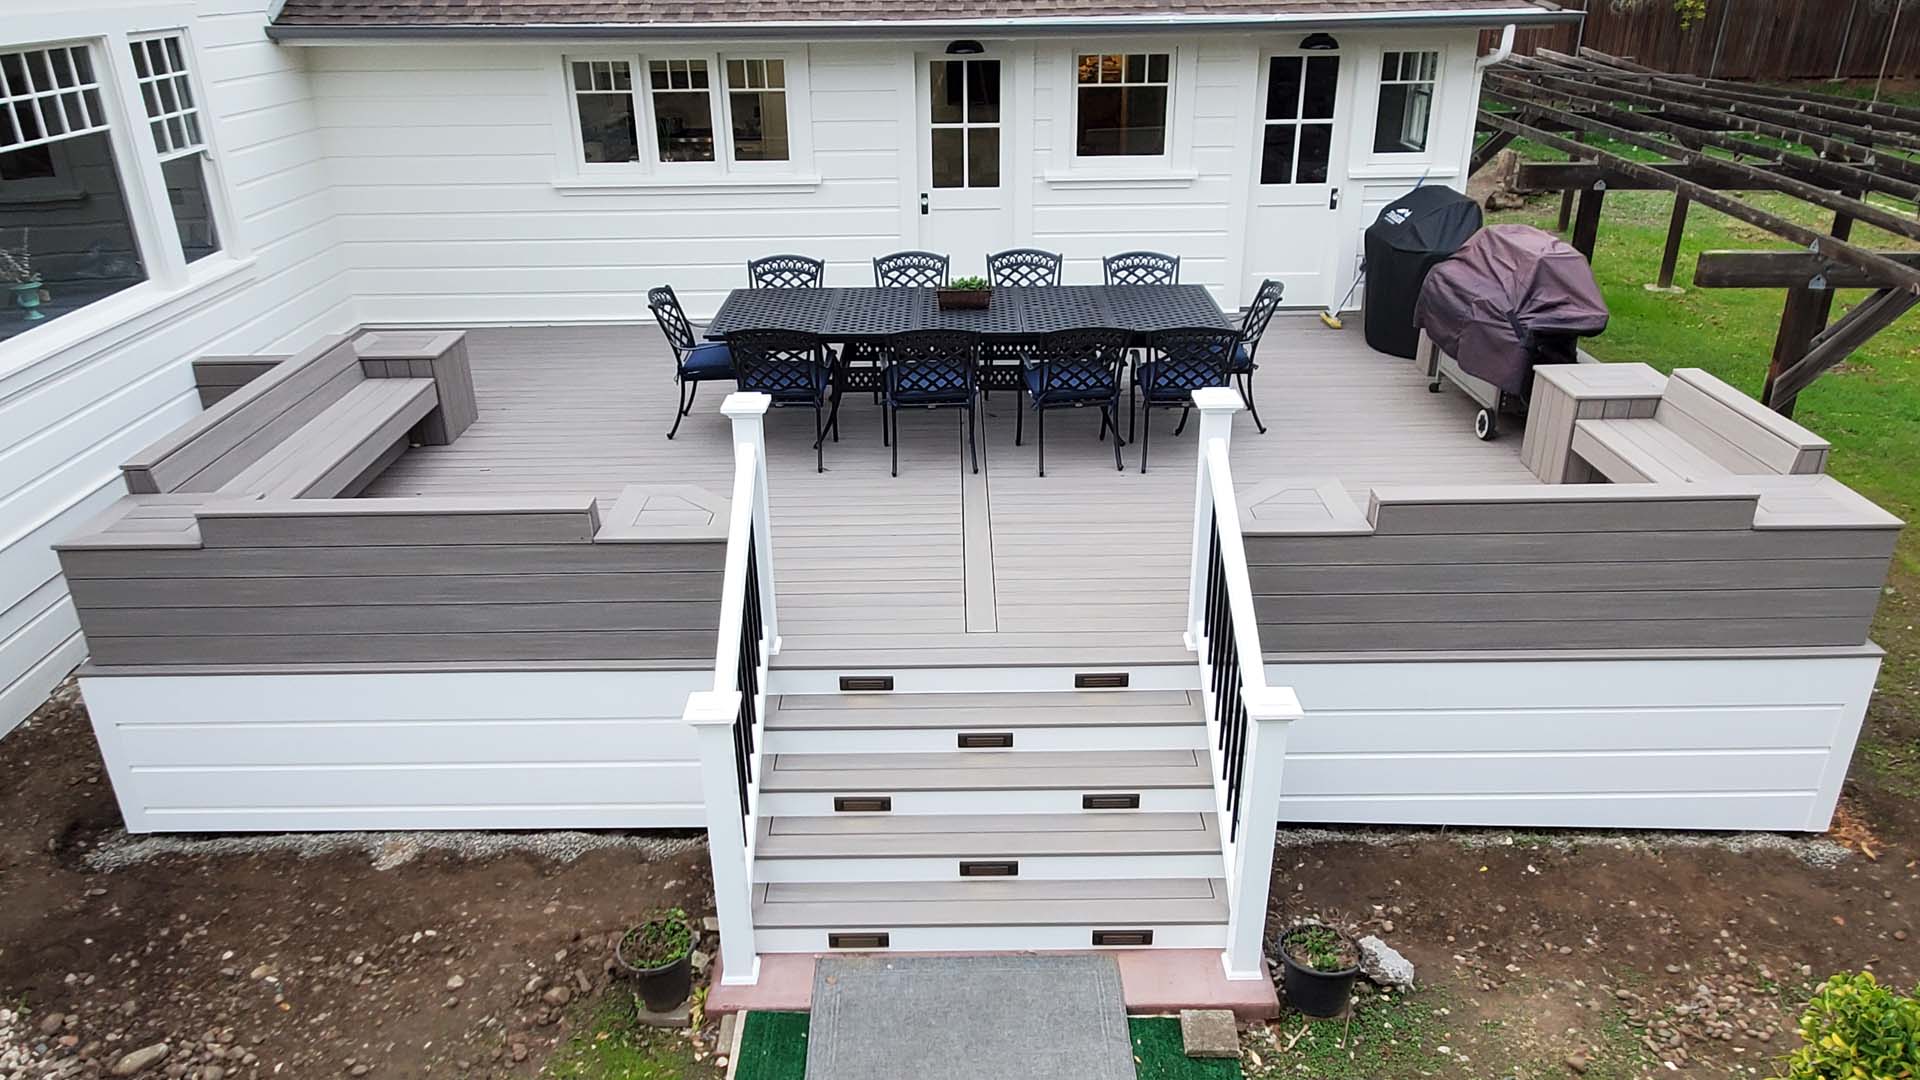 Beautiful new patio deck with built in seats, furniture, and a bbq